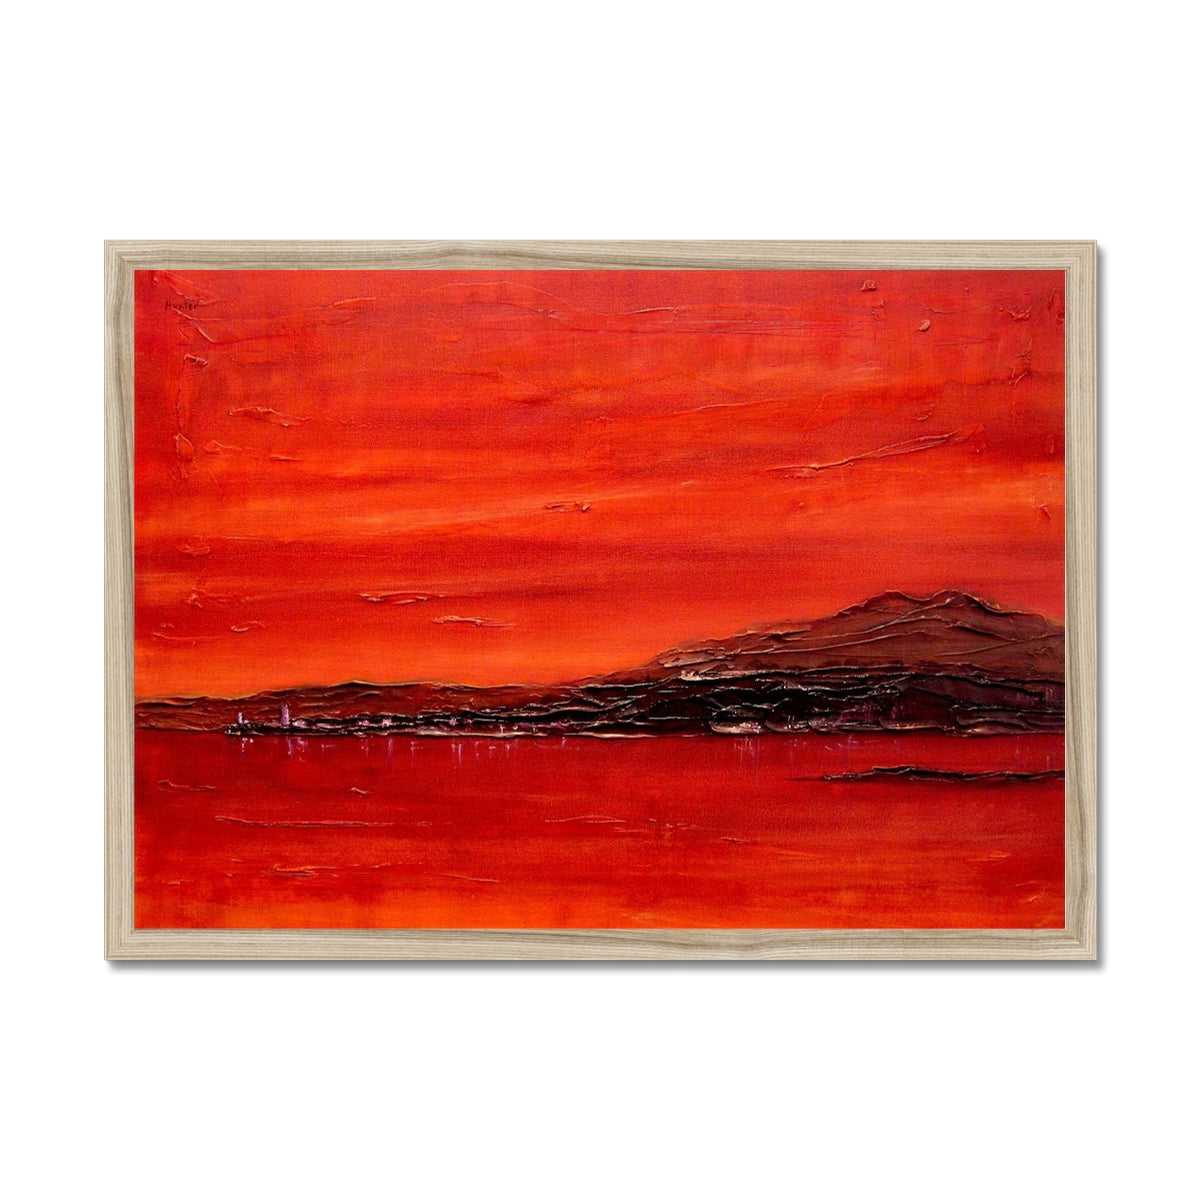 Toward Point Lighthouse Sunset Painting | Framed Prints From Scotland-Framed Prints-Arran Art Gallery-A2 Landscape-Natural Frame-Paintings, Prints, Homeware, Art Gifts From Scotland By Scottish Artist Kevin Hunter